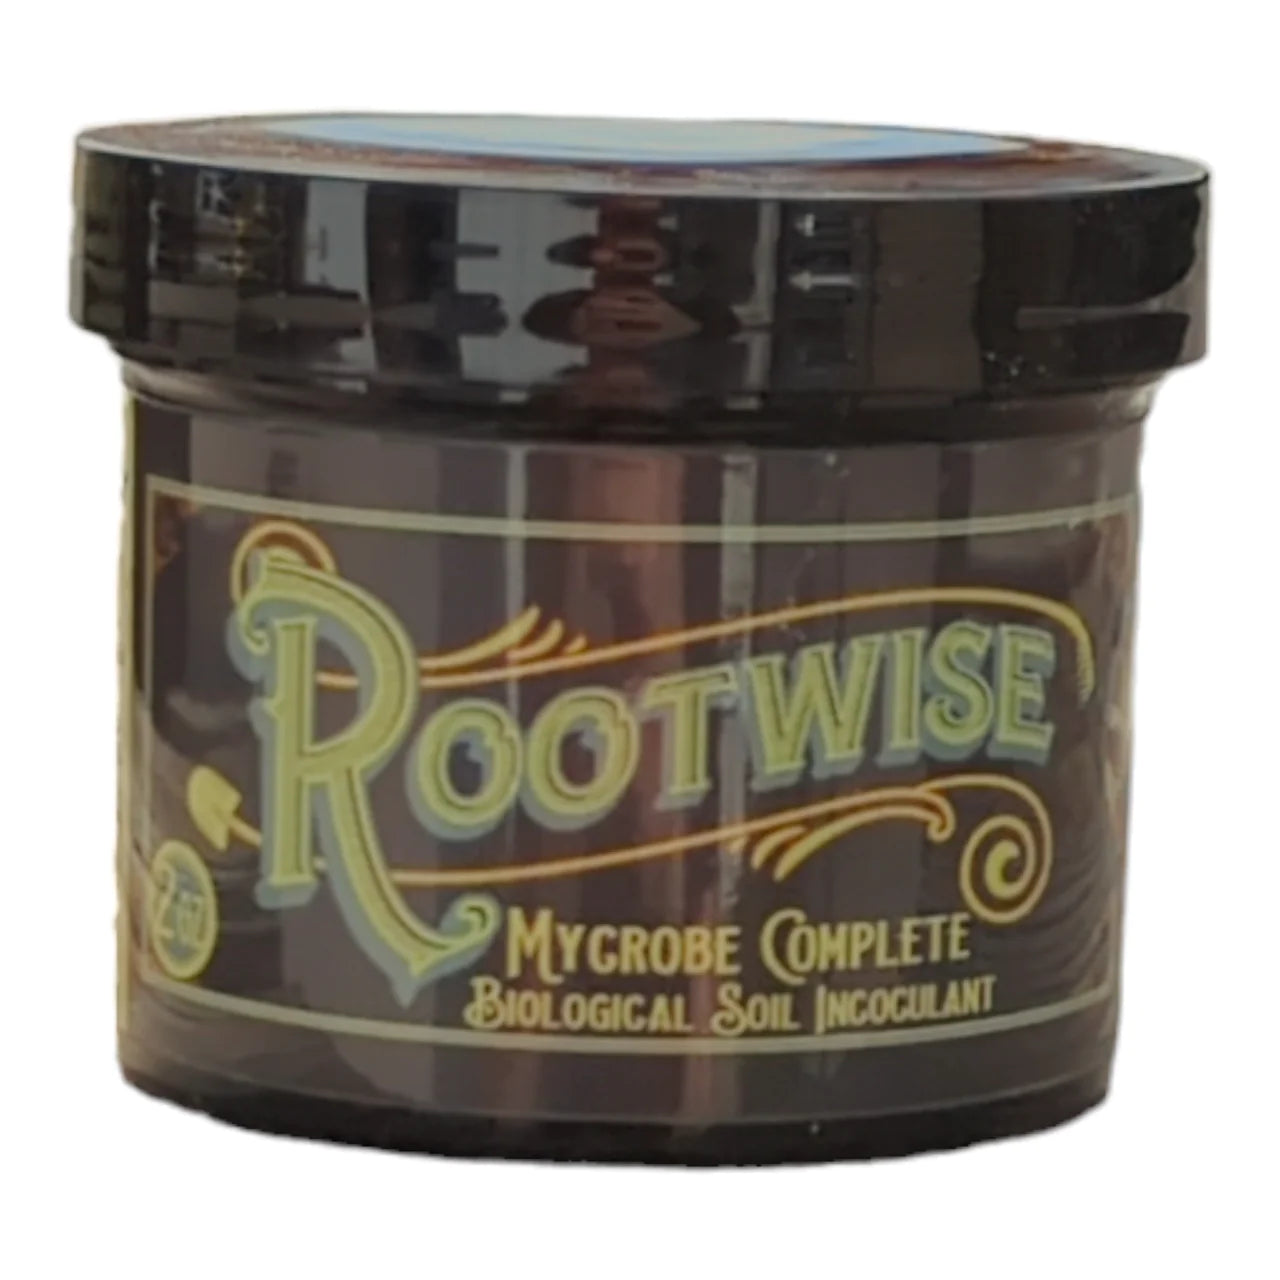 Rootwise Mycrobe Complete (Biological Soil Inoculant)